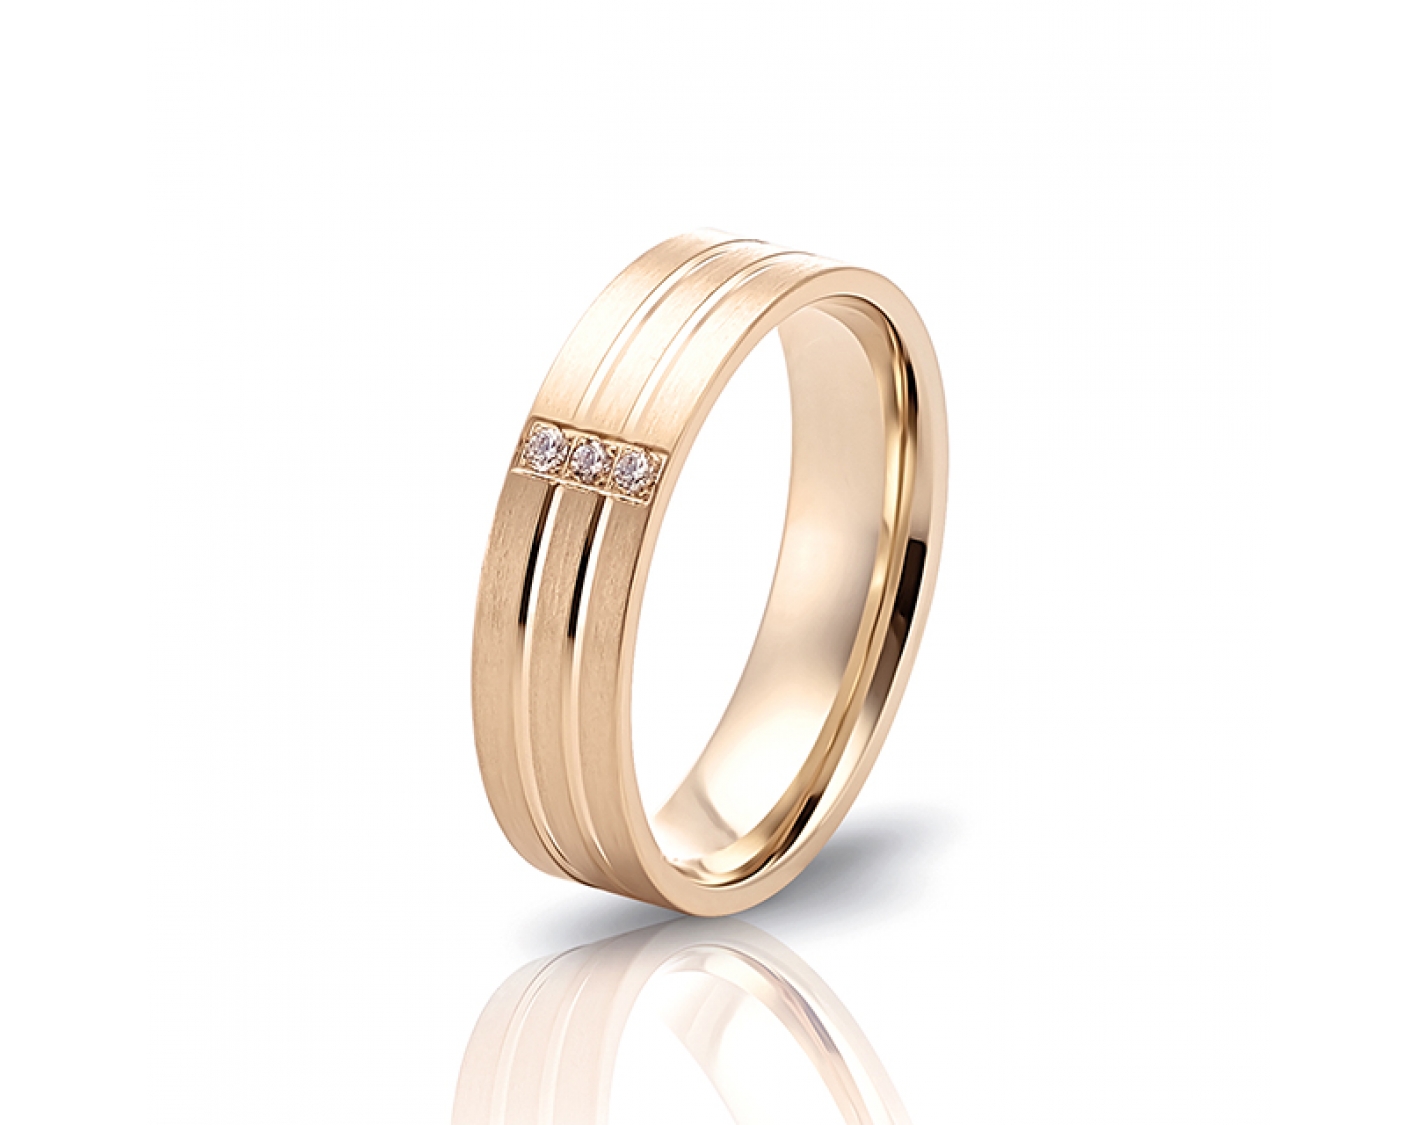 18k yellow gold 5mm matte wedding band with two shiny lines and diamonds Photos & images